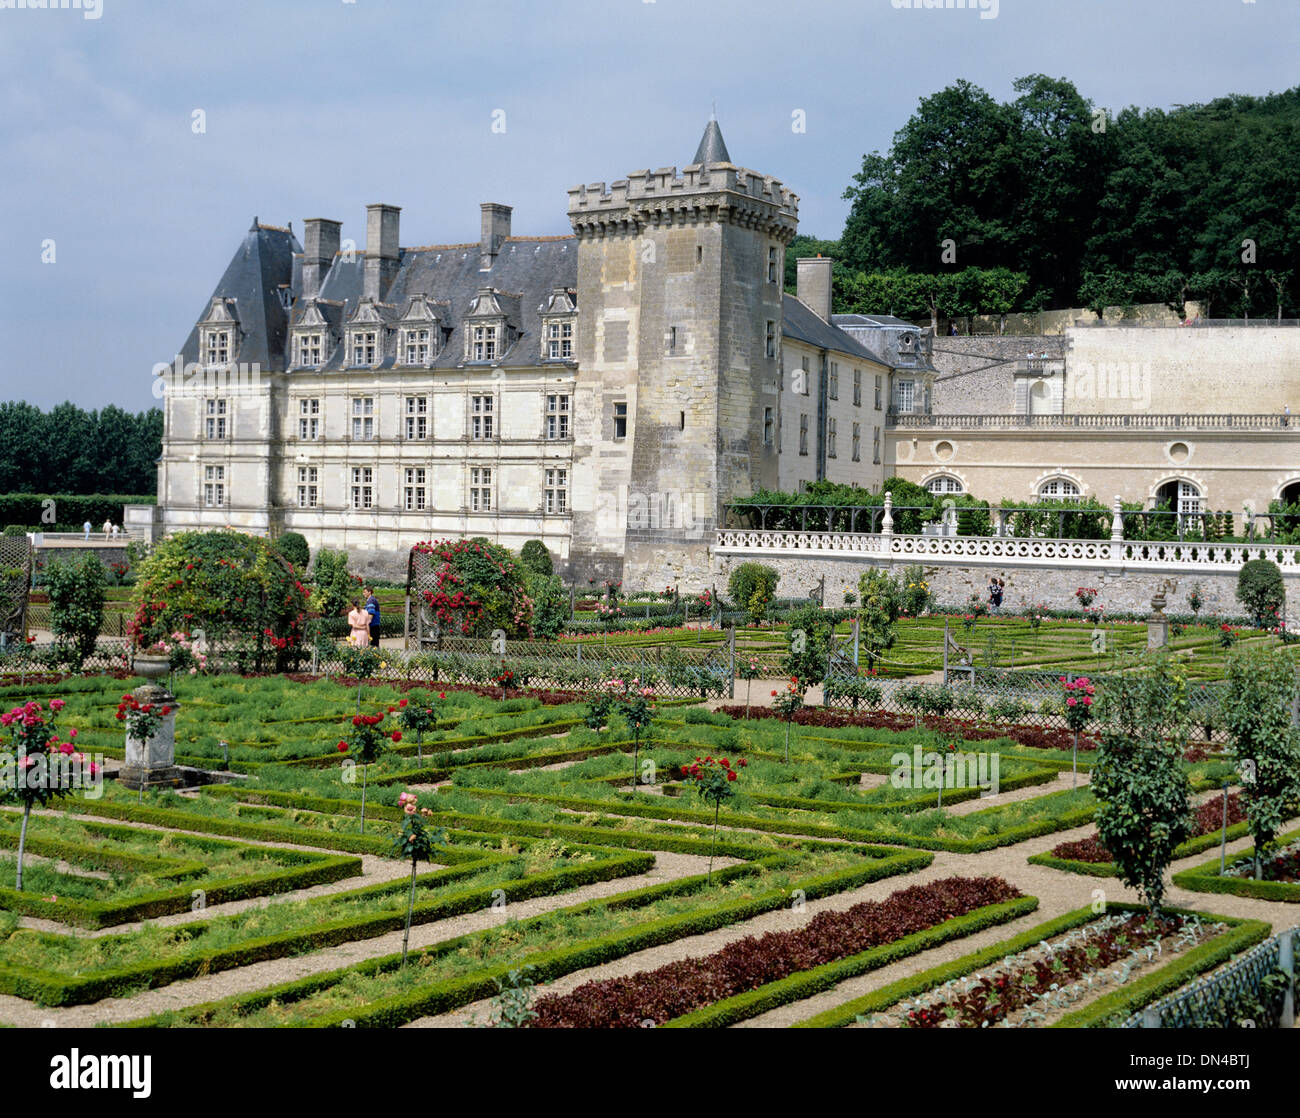 Chateau and gardens, Villandry, Indre-et-Loire, France Stock Photo